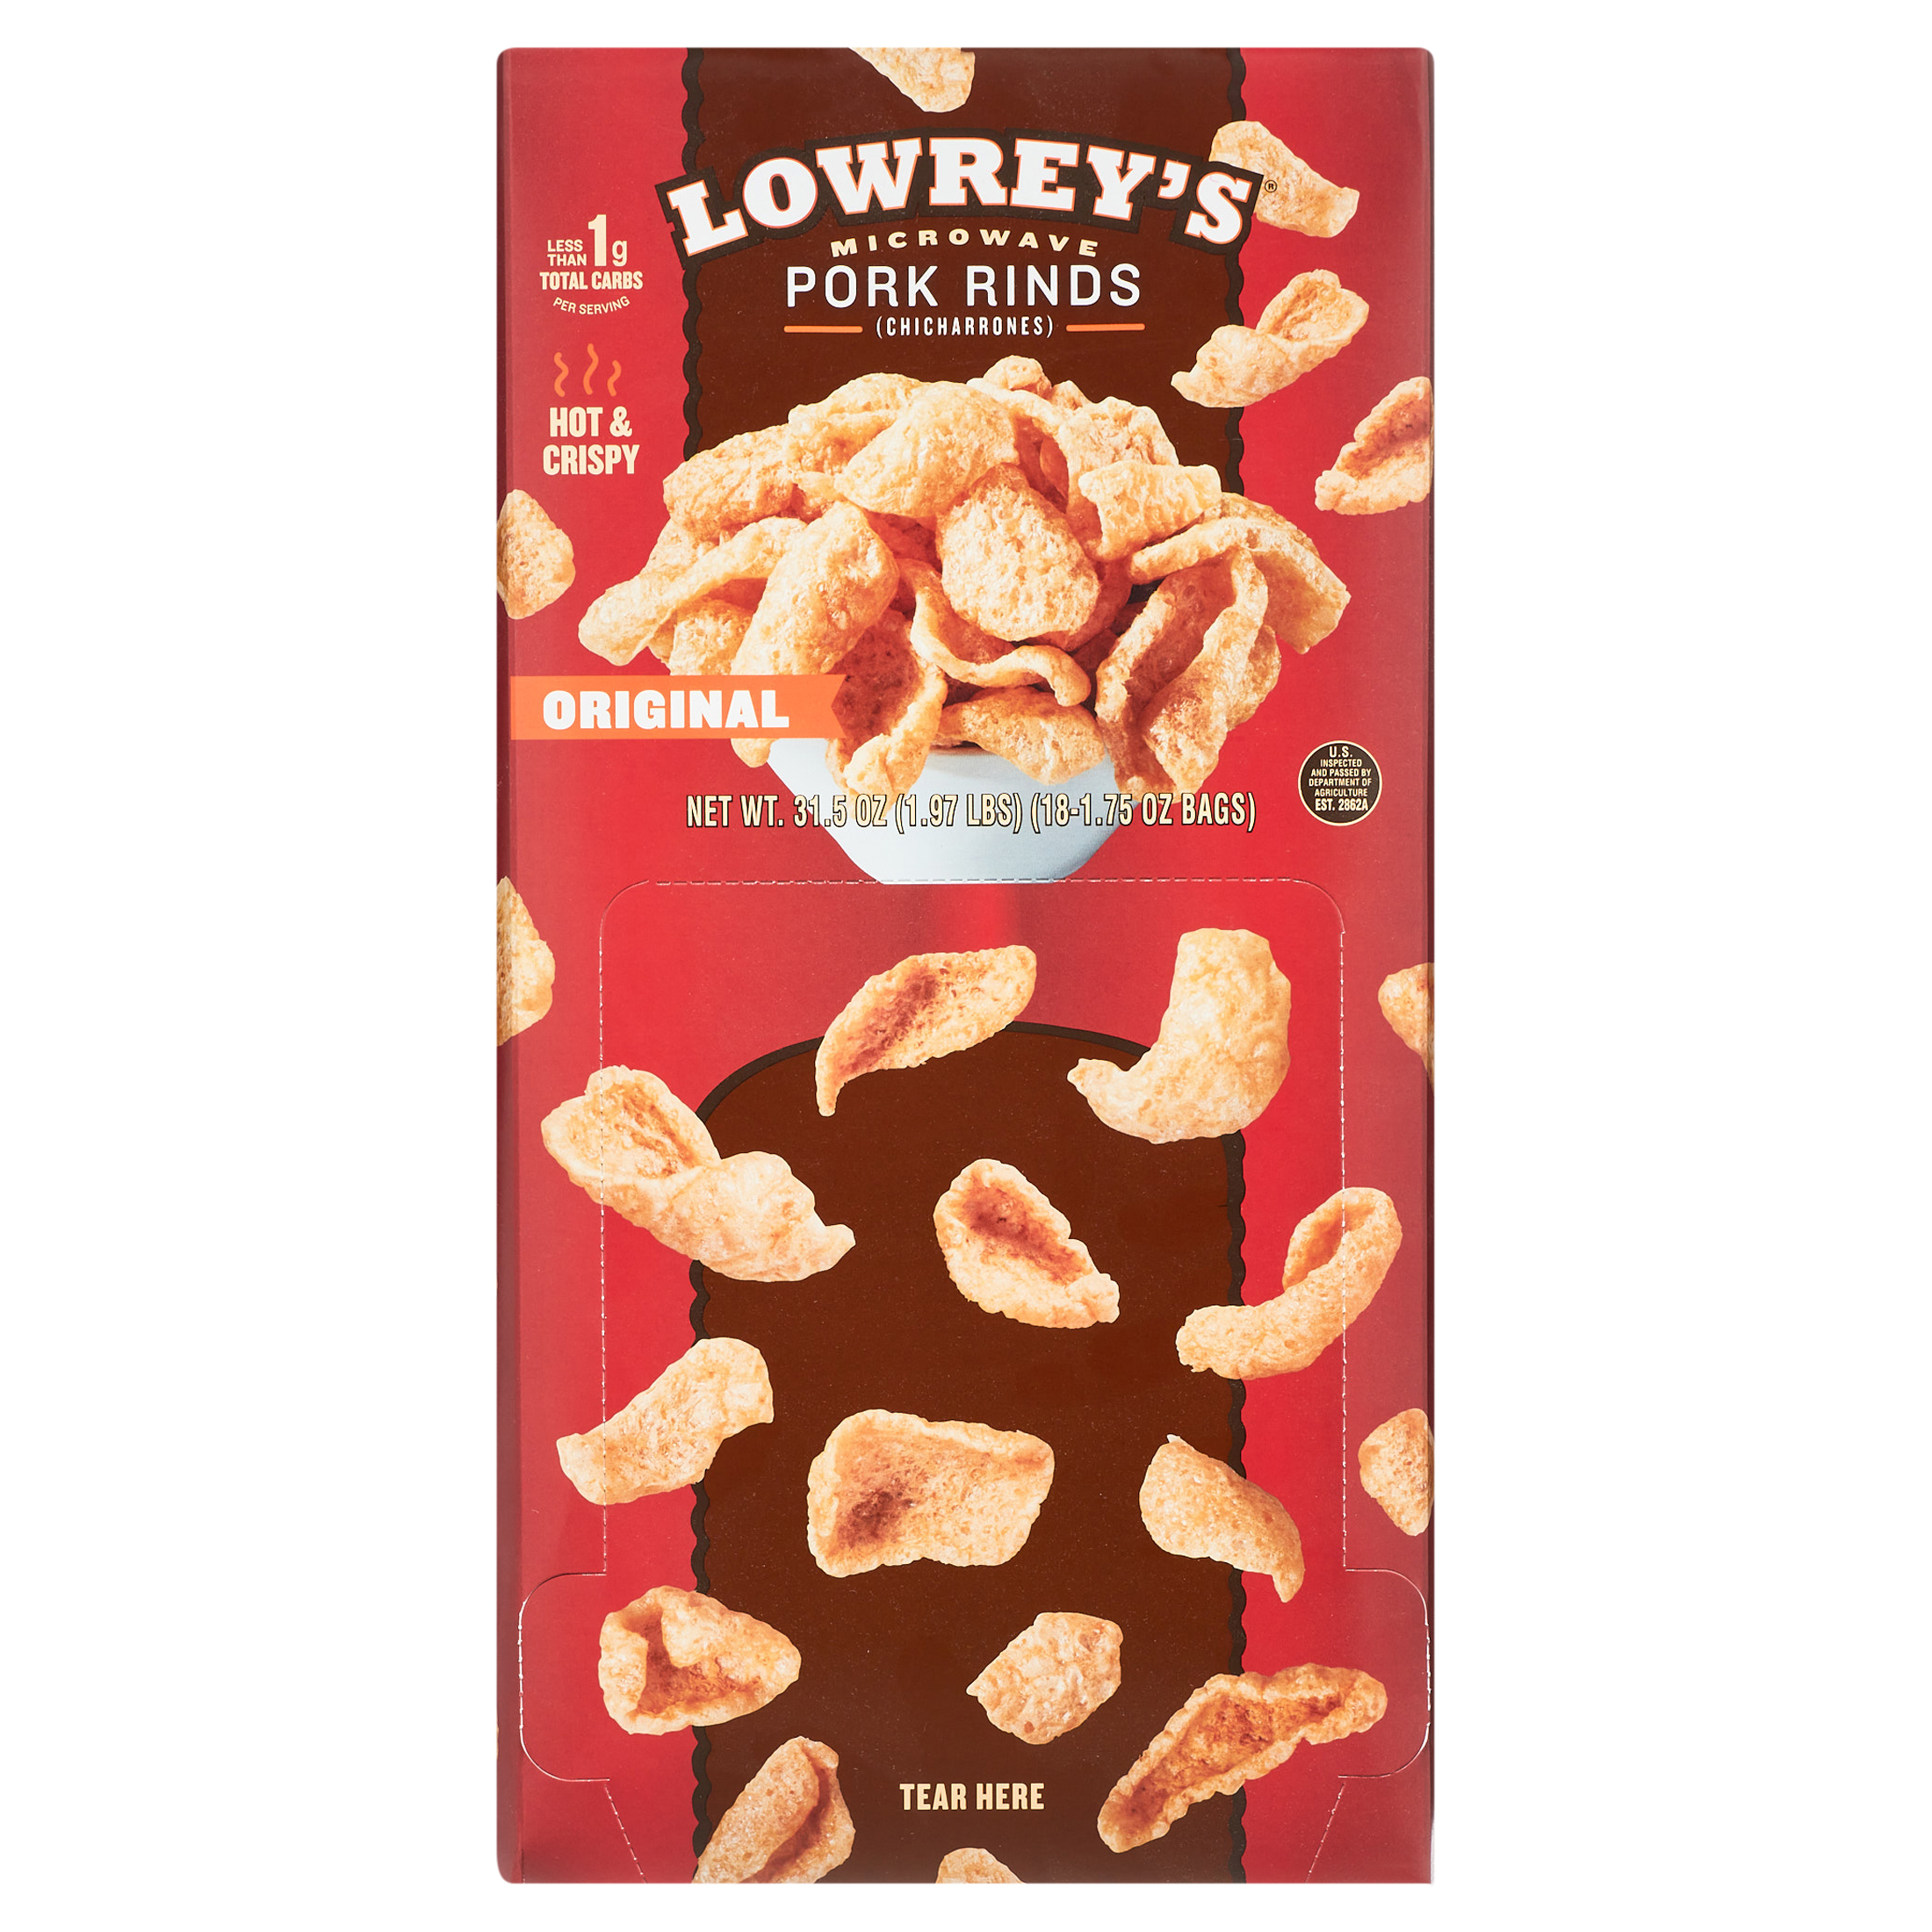 Lowrey's Bacon Curls Microwave Pork Rinds (Chicharrones), Original, 1.75 Ounce (Pack of 18) - image 1 of 6